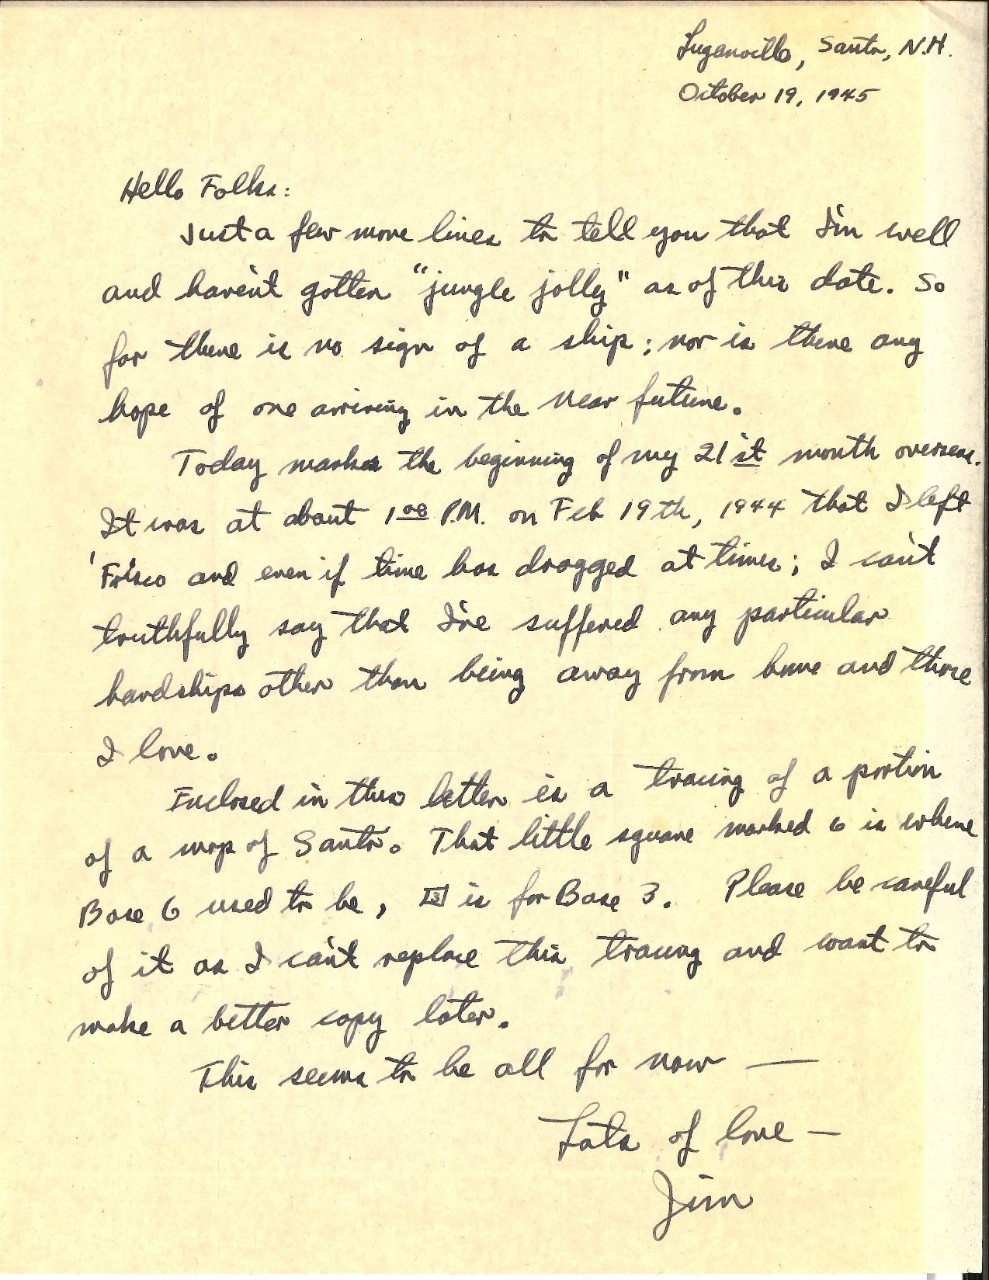 Letter from James Wright to his parents, Oct. 19, 1945